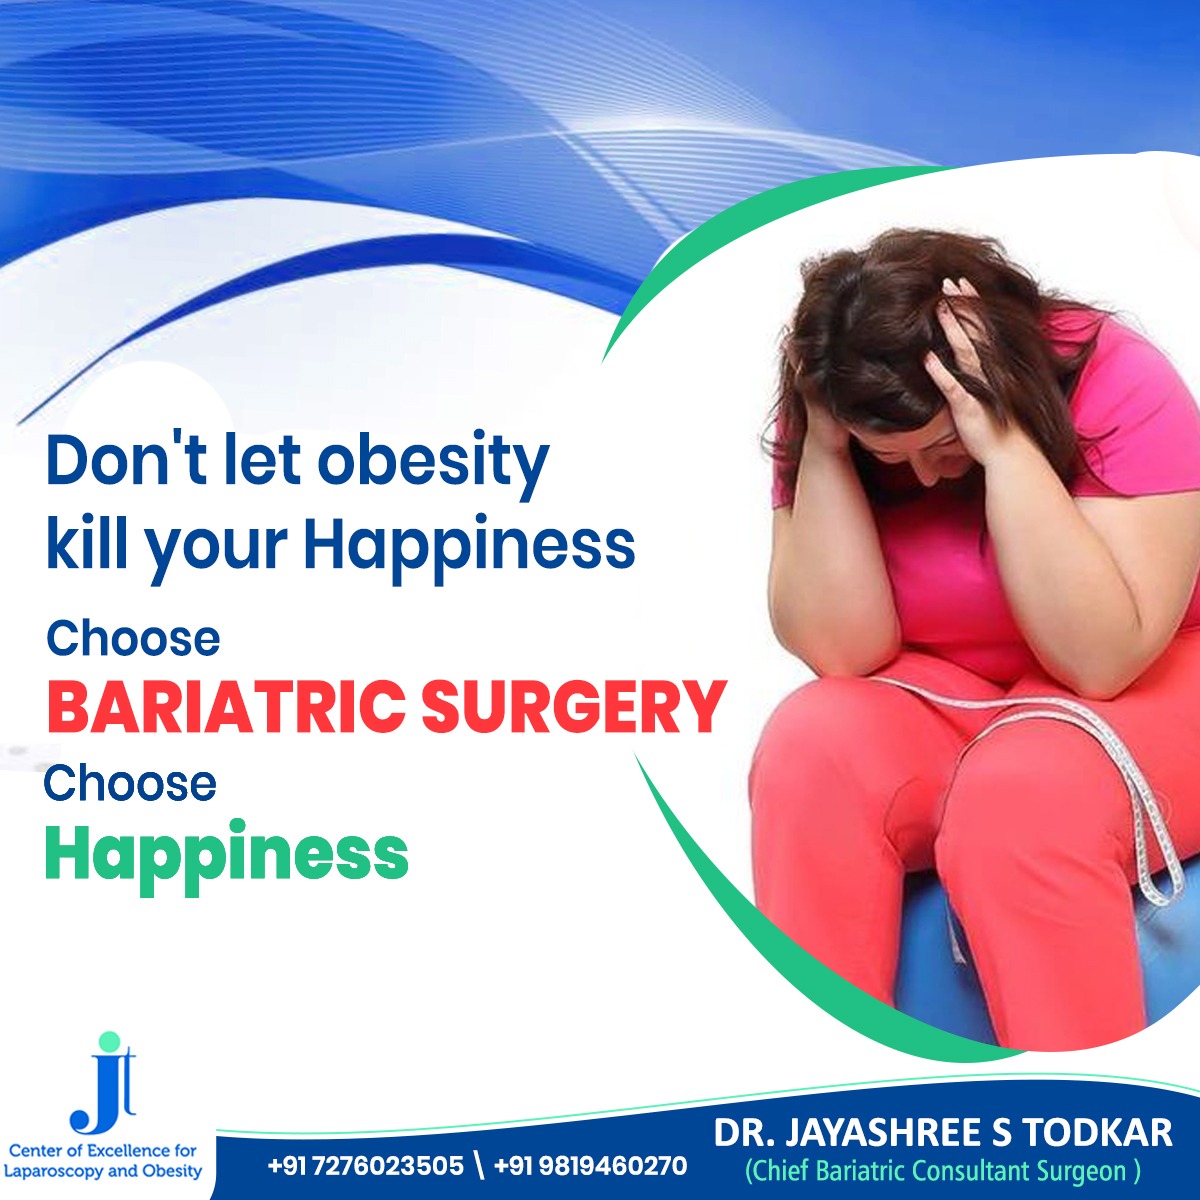 Don't let obesity kill your Happiness
Choose
BARIATRIC SURGERY
Choose
Happiness
.
.
.
.
#ObesityTreatment #BariatricSurgery #ChooseHappiness #DrJayashreeTodkar #MetabolicSurgery #WeightLossSurgery #HealthAndWellness #ExpertCare #HealthyLiving #LifeTransformation